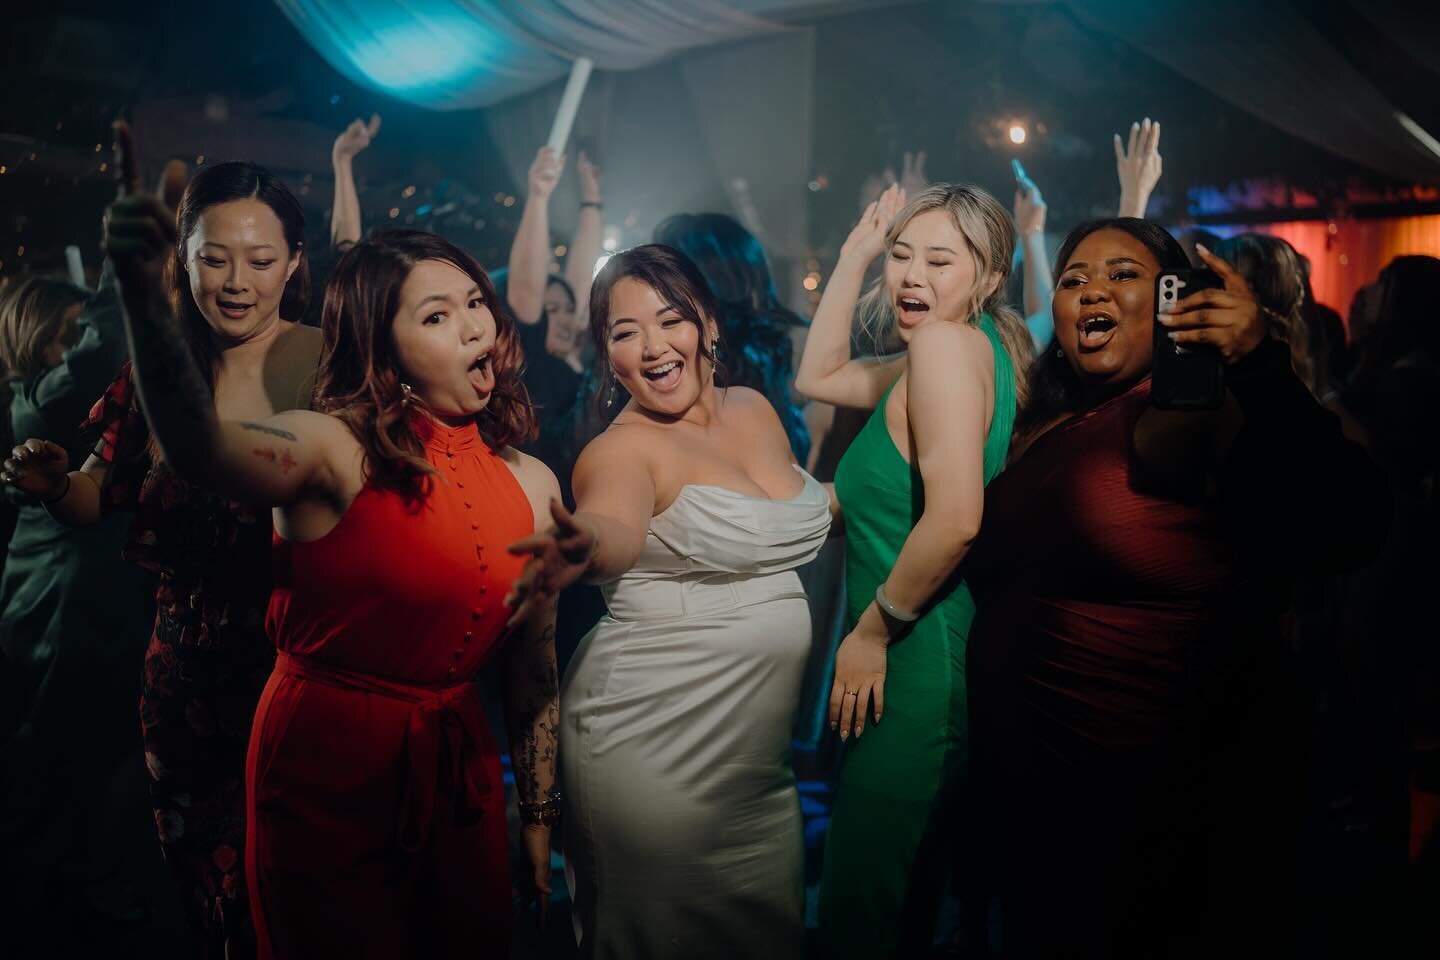 Oops, it completely slipped my mind that it's Friday! 🎉 Time to celebrate the start of the weekend! 🙌 Happy Friday, everyone!! 🥳

www.koukiphotographynz.com

#aucklandweddingphotography #weddings #instagood #weddingstyle #bridetobe #nzweddingphoto